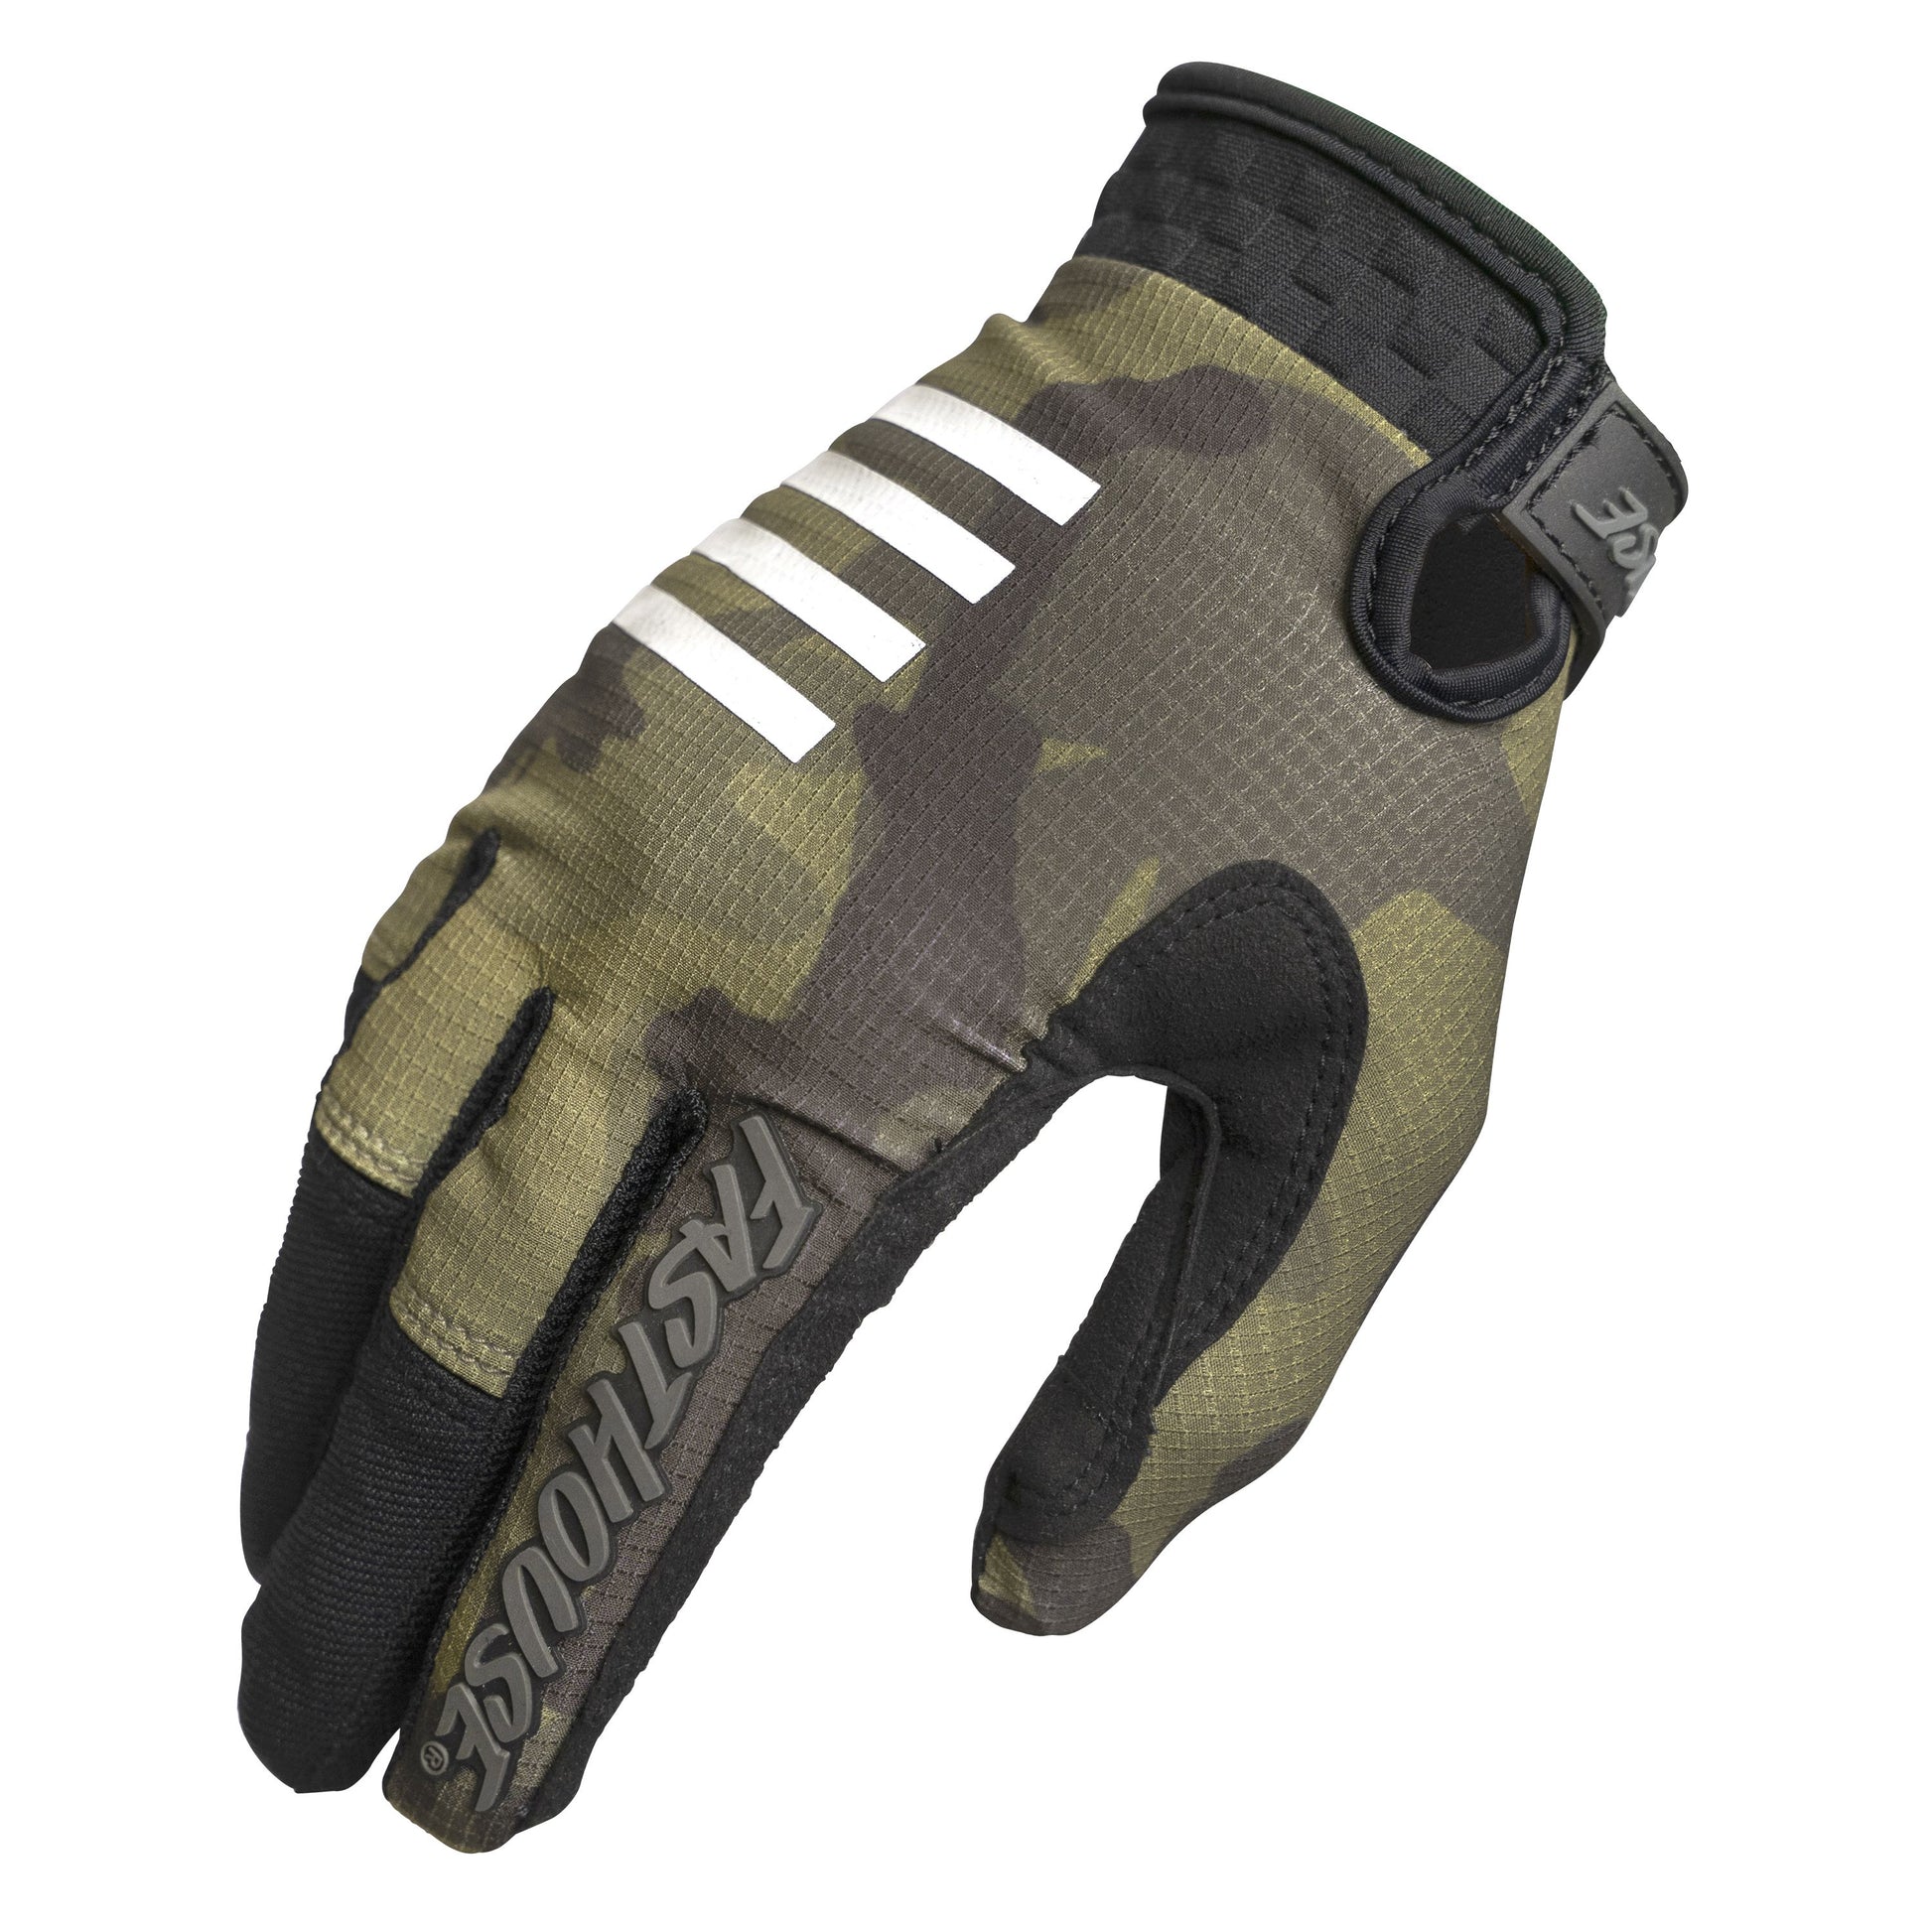 Fasthouse Menace Speed Style Glove Camo Bike Gloves